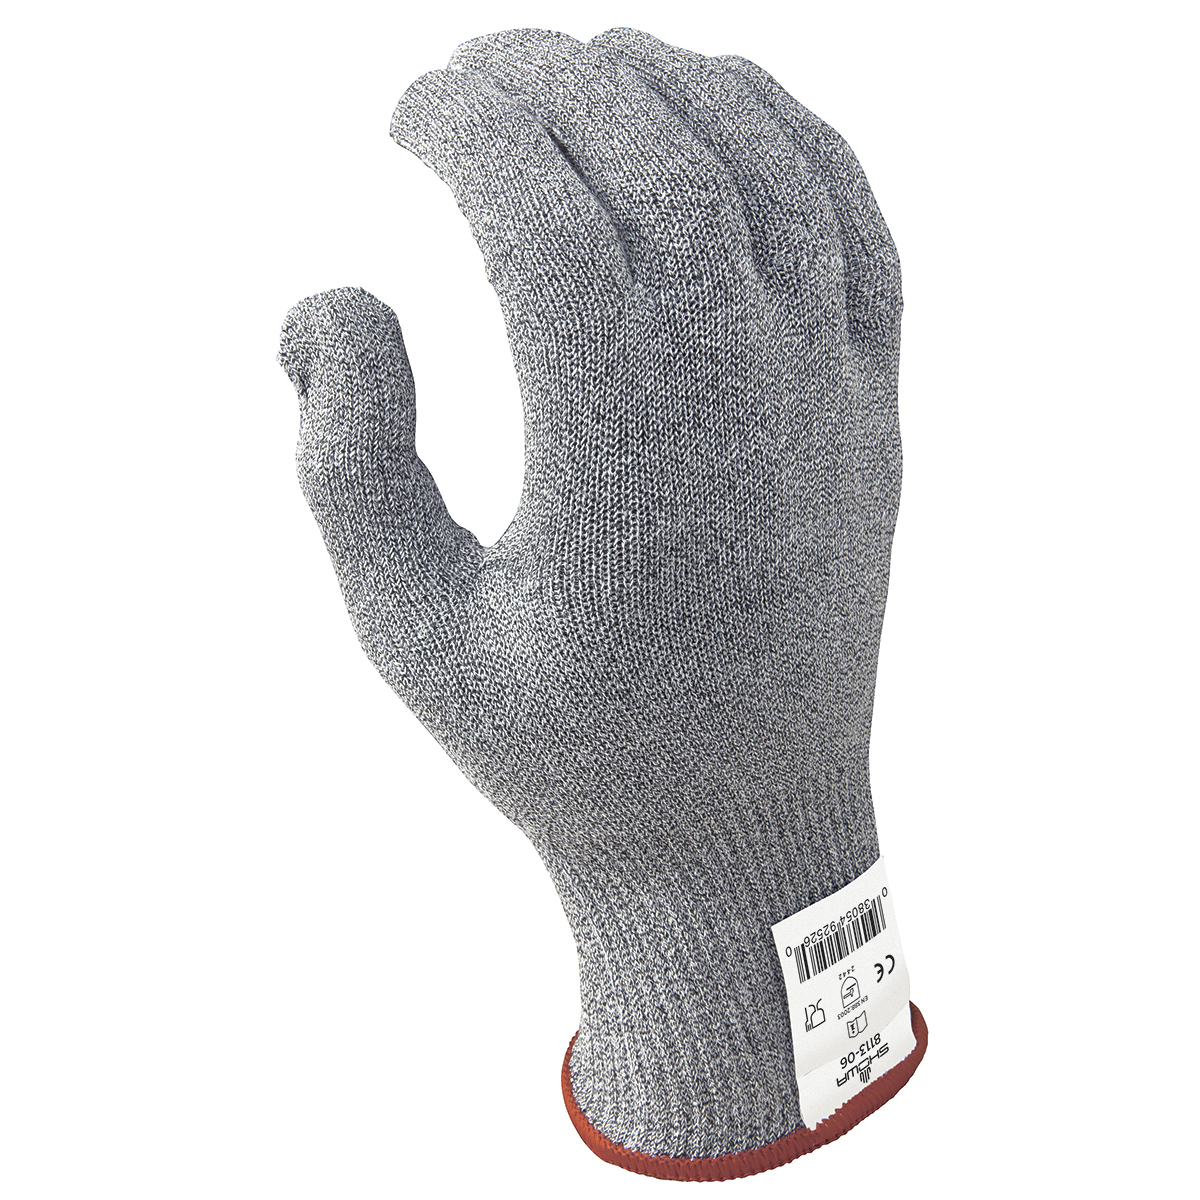 X-Small SHOWA 8113C T/Flex Dyneema Engineered Fiber Glove Cut Resistant 8.2 Length Plus 13 Gauge Seamless Thermax Lined Knit Pack of 1 Glove 8.2 Length Showa Best Glove Inc 8113C-06 